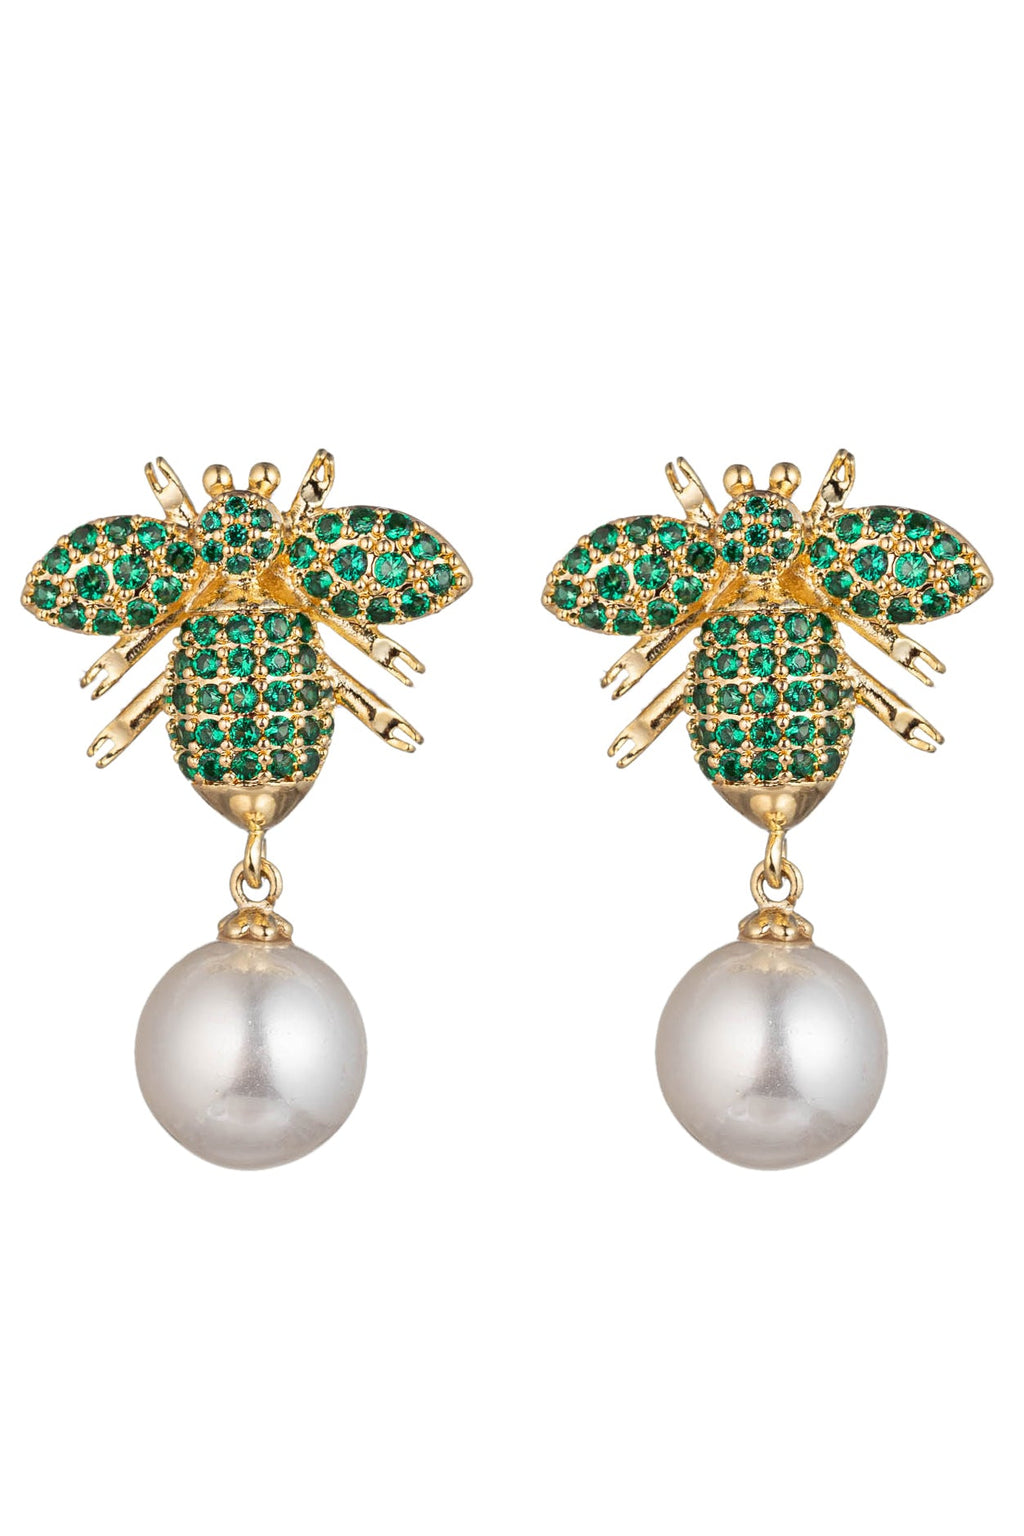 Mia Green Bee Cubic Zirconia Drop Earrings: A Buzzing Elegance for Nature Enthusiasts.